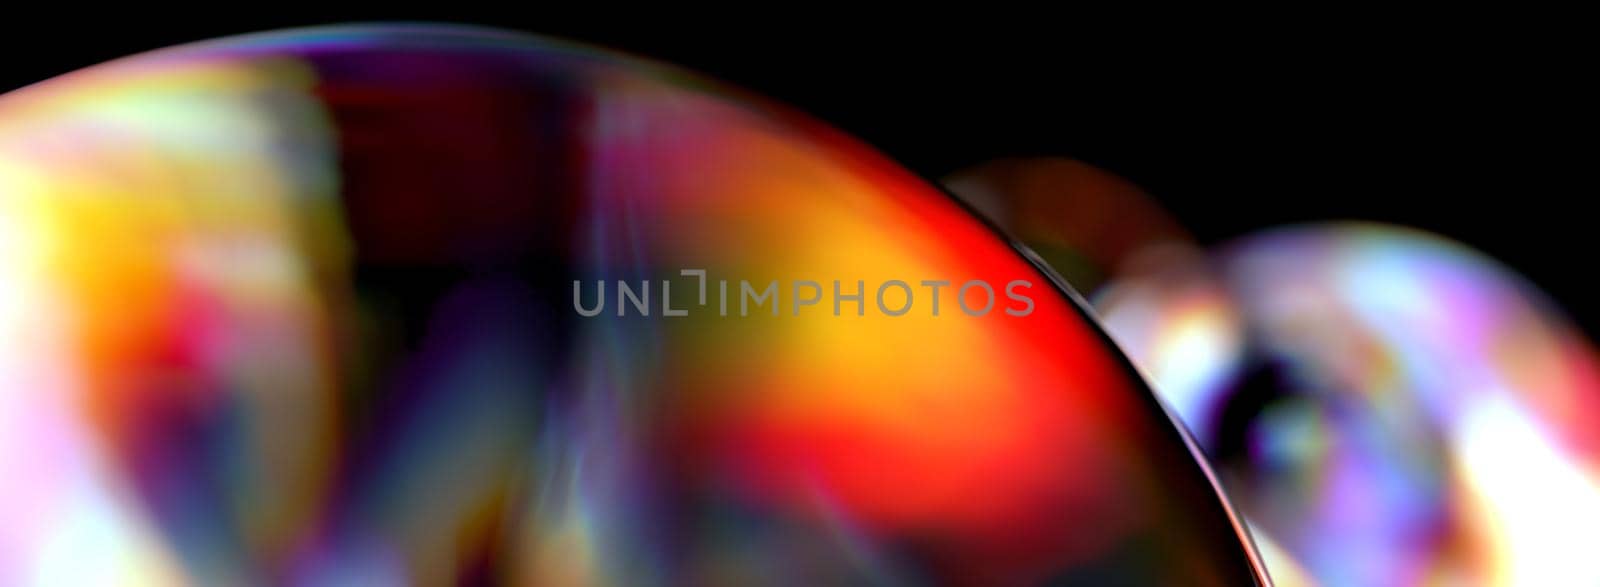 Abstract glass shape with rainbow reflections and refractions by bawan